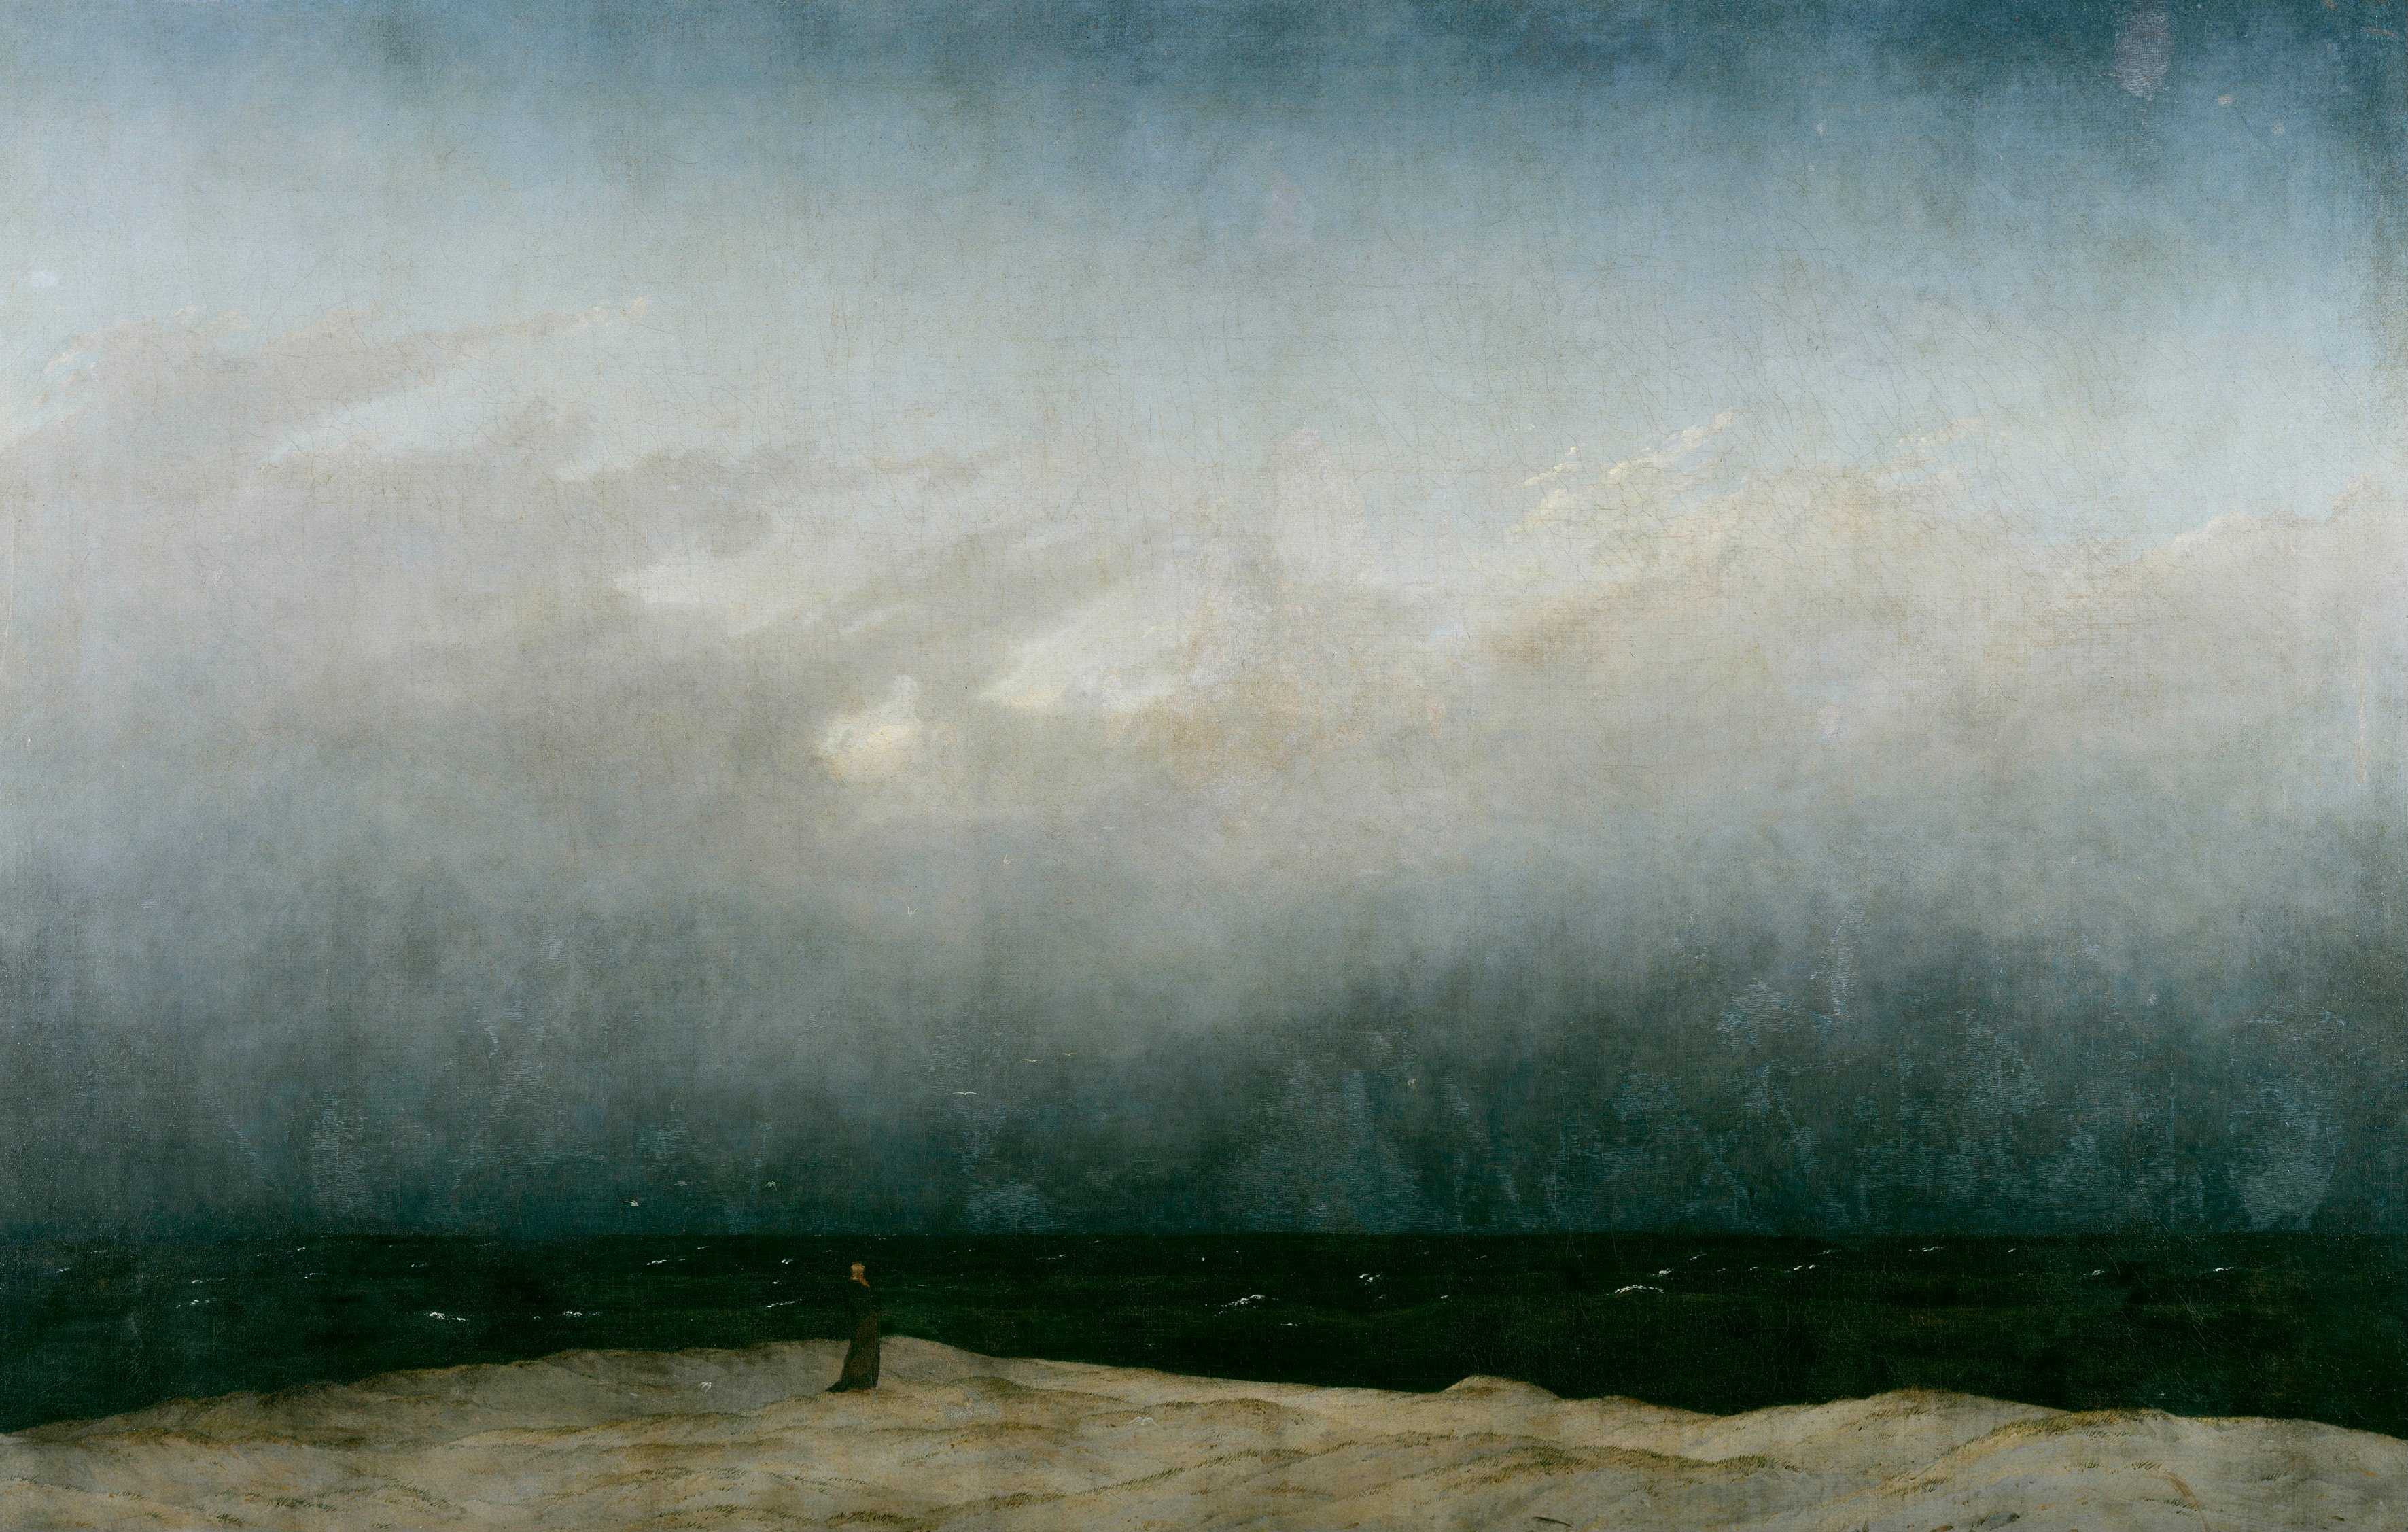 Find out more about Caspar David Friedrich - The Monk by the Sea